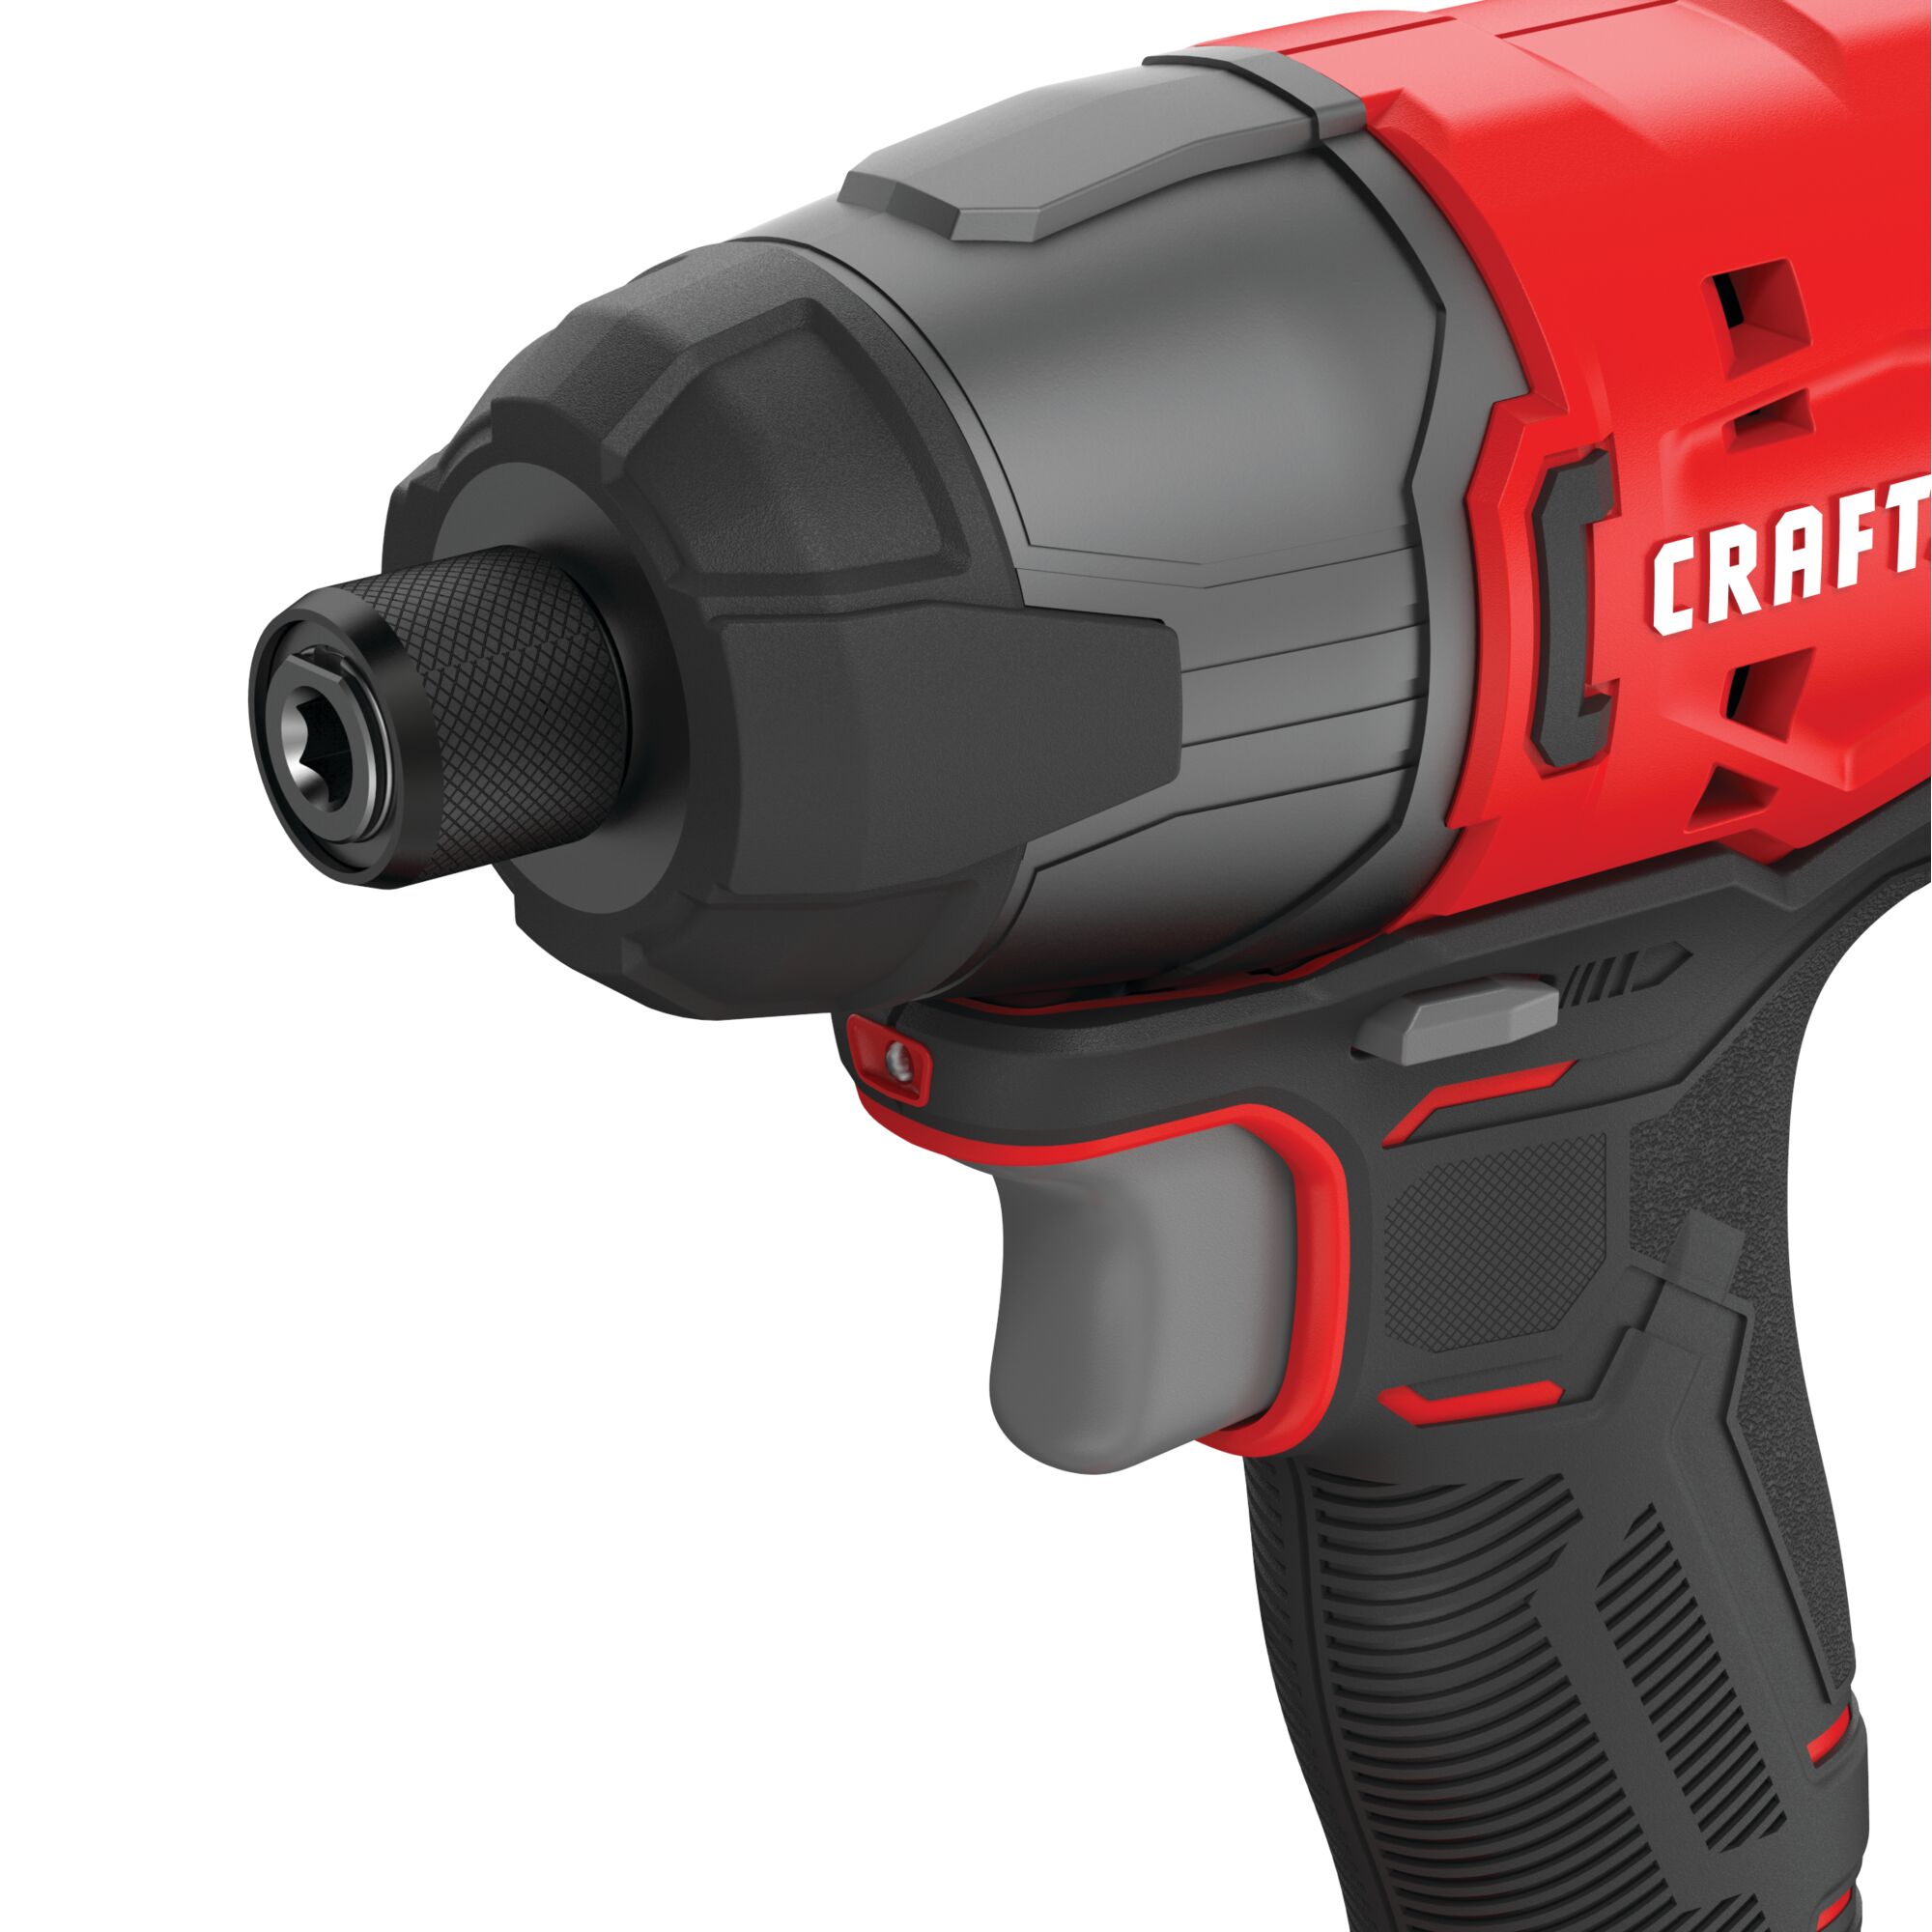 Quick and easy feature of 20 volt cordless quarter inch impact driver kit 2 batteries.